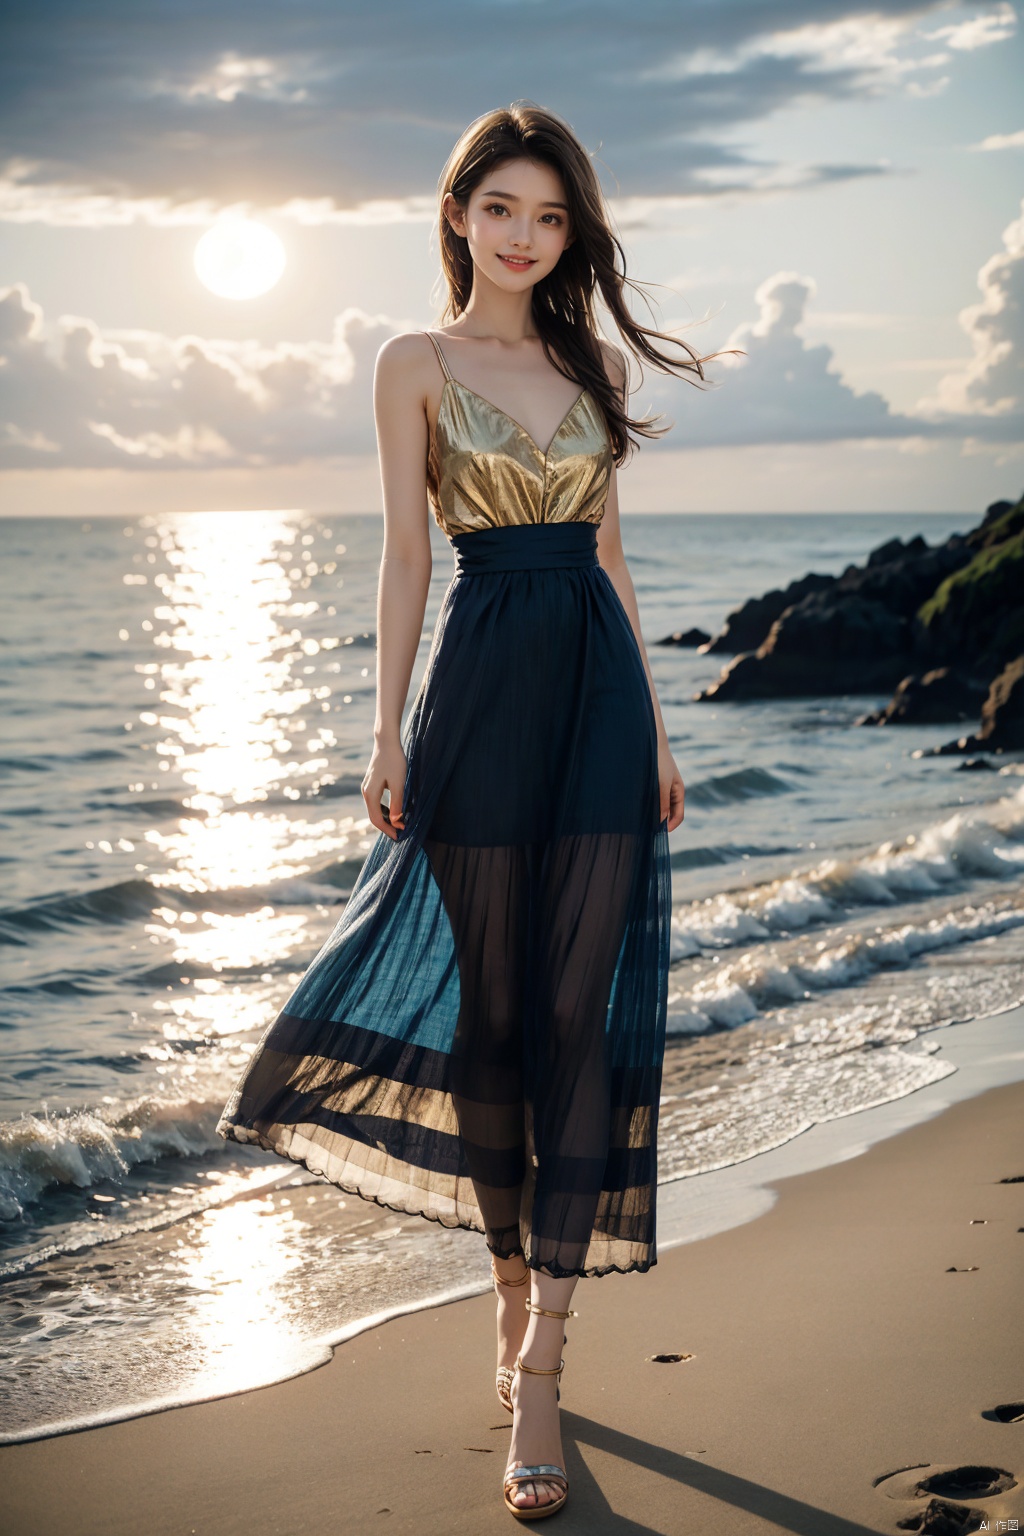 1 girl, (bright eyes, sun kissed skin, carefree expression), fashion, (colorful long skirt), playful posture, smile, full body, slender legs, young girl's body proportions, beach background, lighthouse, soft sea breeze, dynamic composition, golden hour lighting, blurred background, rich colors, fine details, surrealism, 50mm lens, relaxed atmosphere. Portrait photography, 35mm film, naturally blurry, ((poakl)), dress